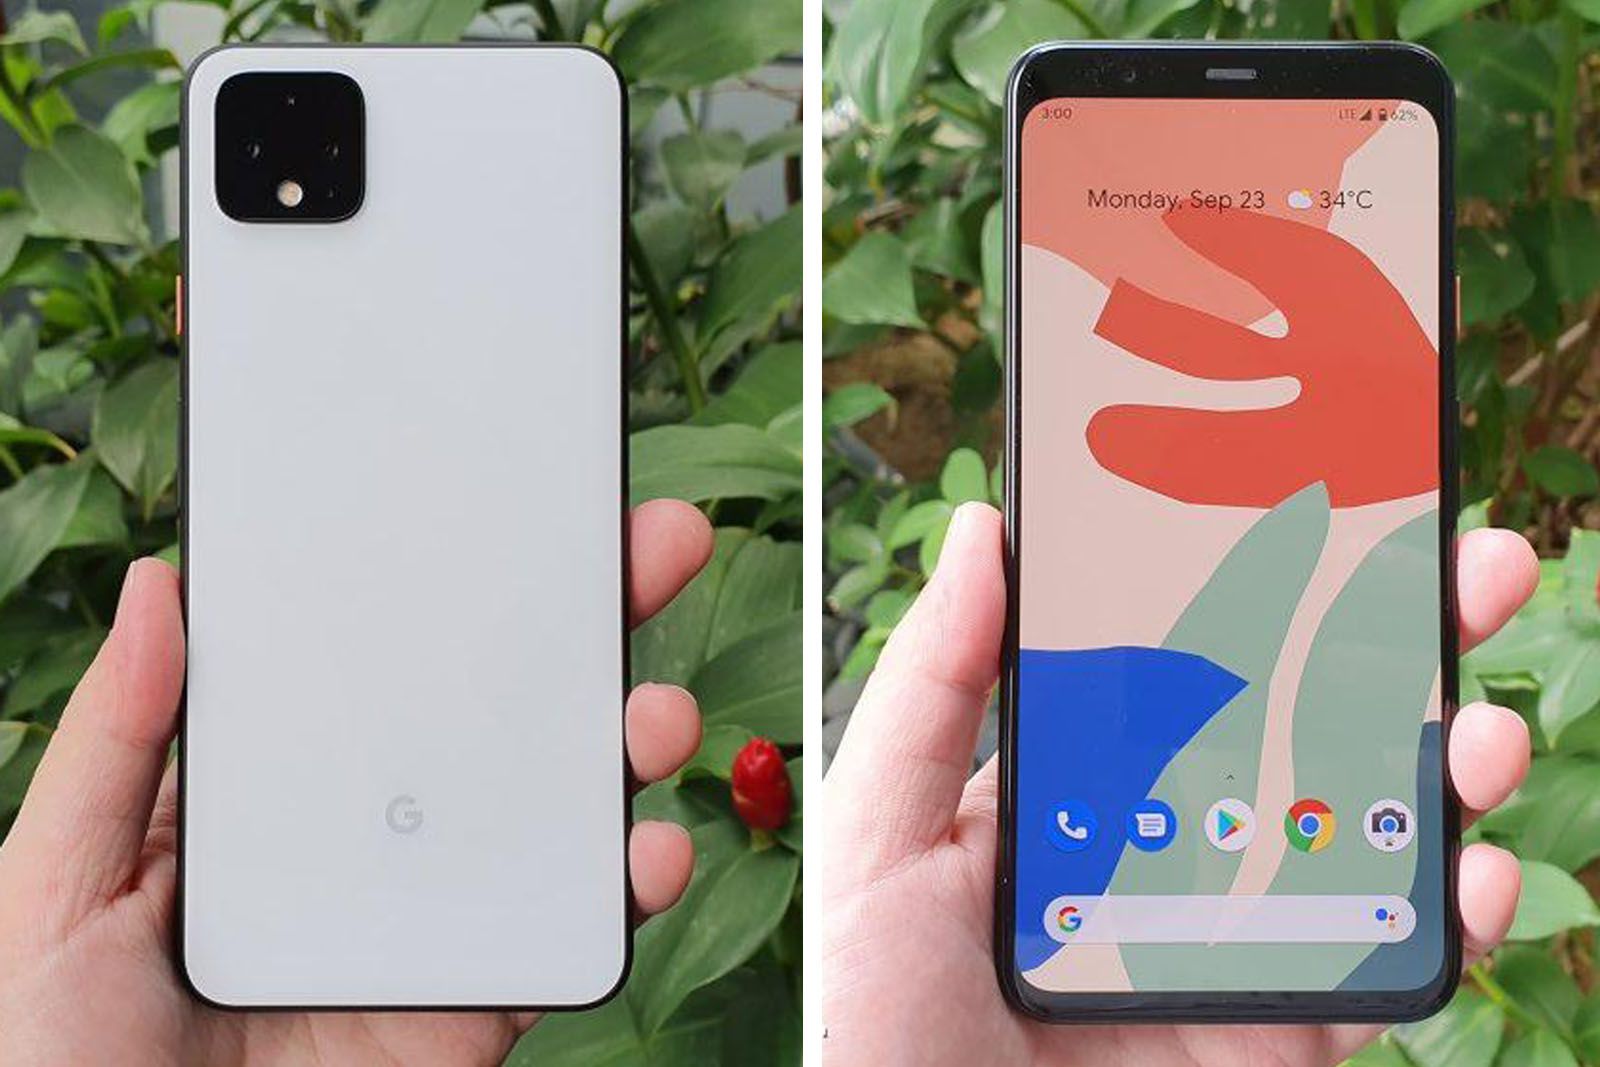 Every angle of Google Pixel 4 XL revealed in hands on images image 1